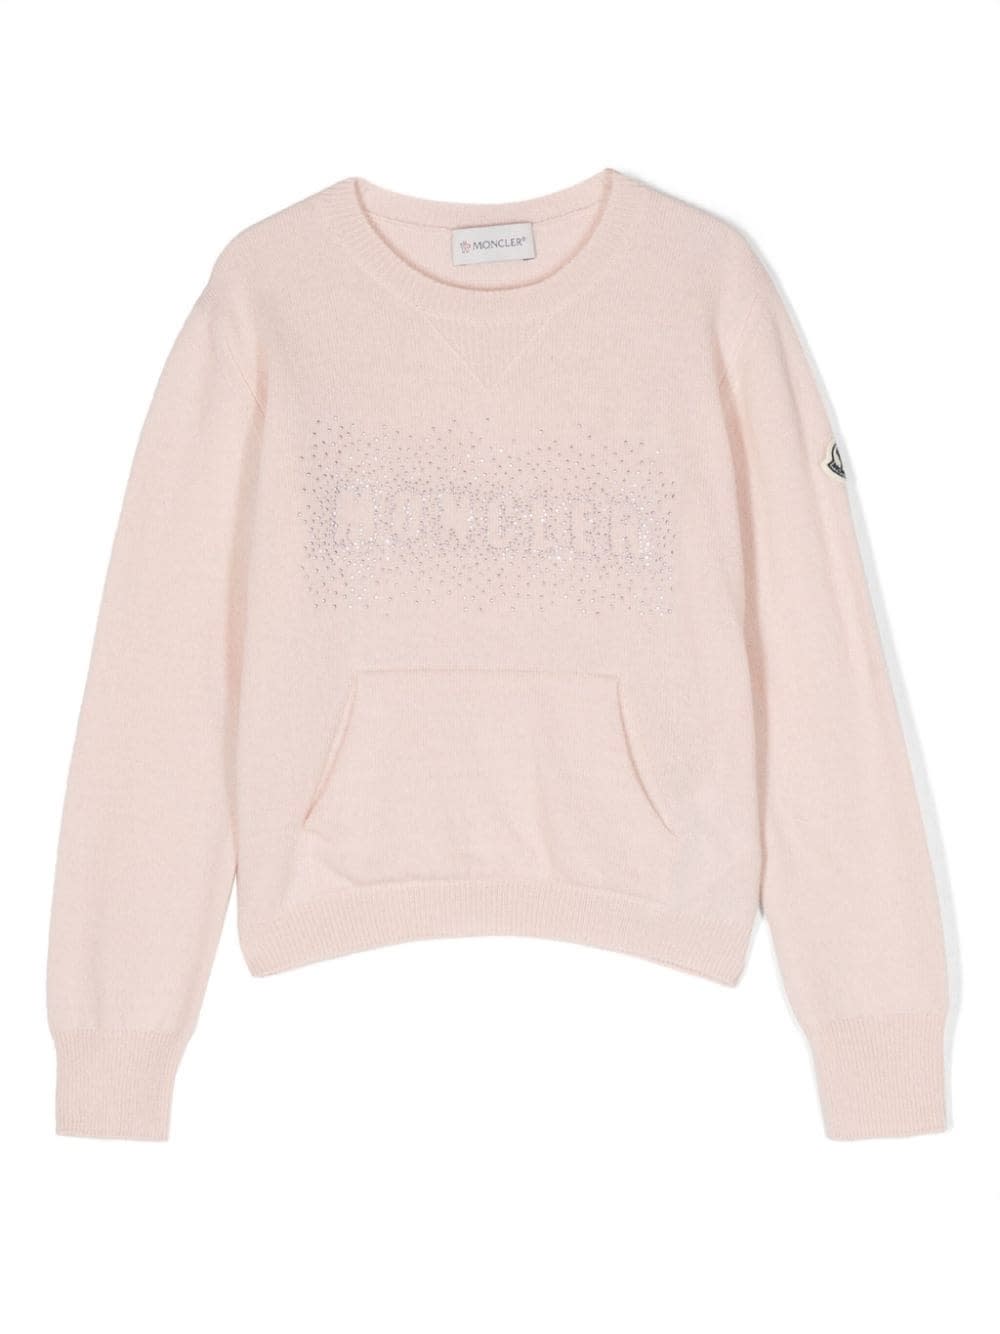 MONCLER PINK WOOL SWEATER WITH CRYSTALS LOGO